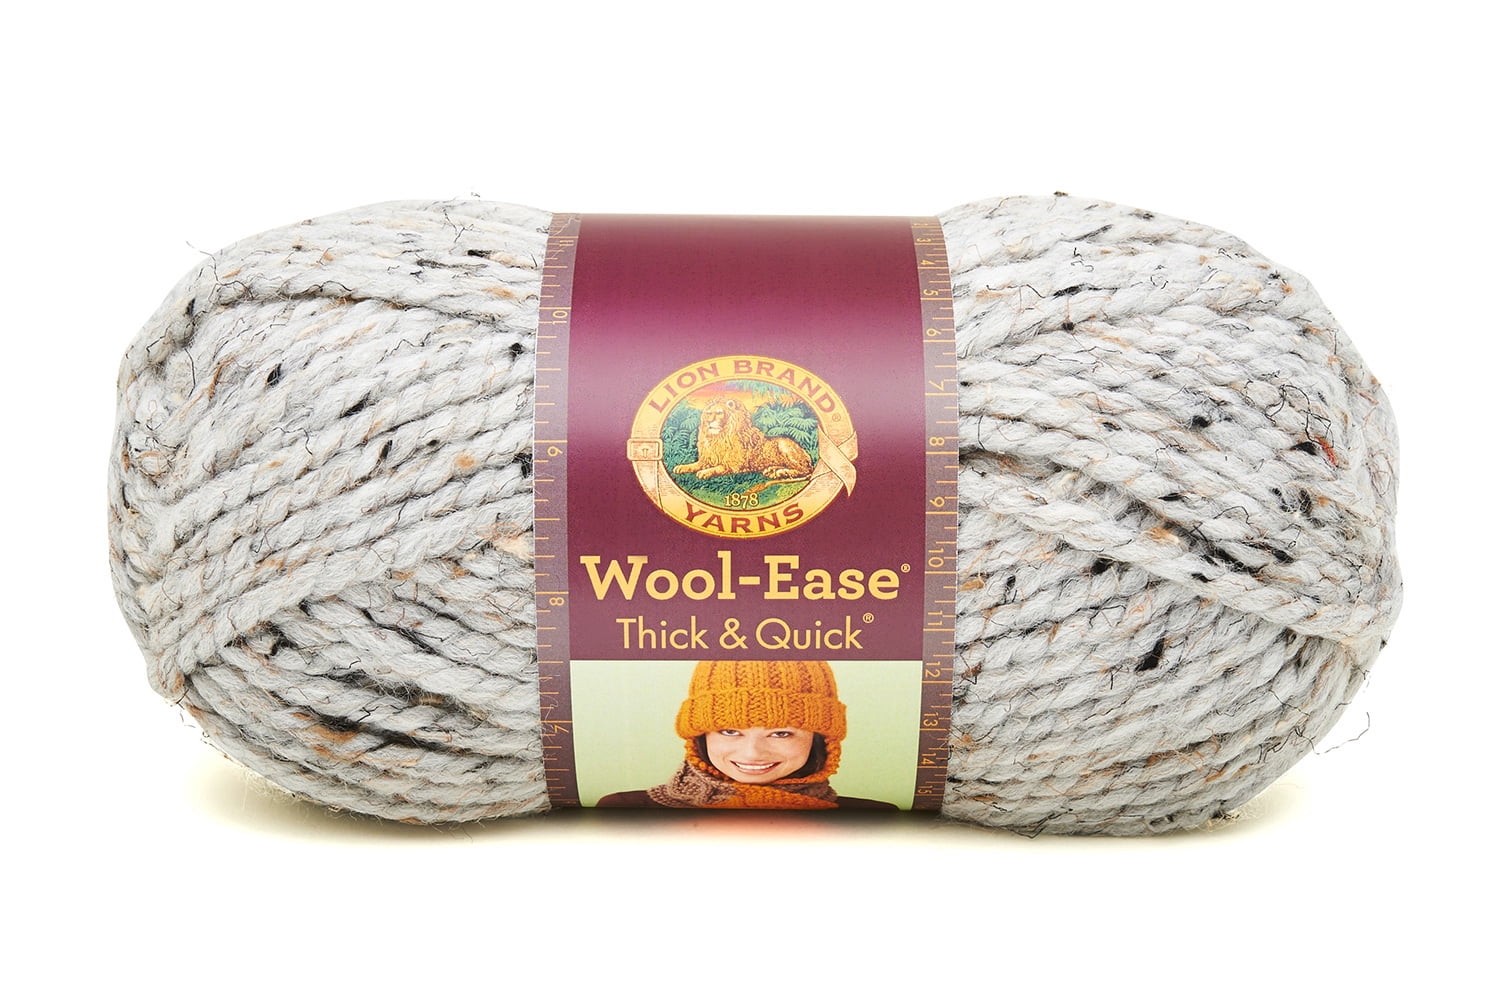 Lion Brand Wool-Ease Thick & Quick Yarn-Marble Stripes, 1 count - QFC